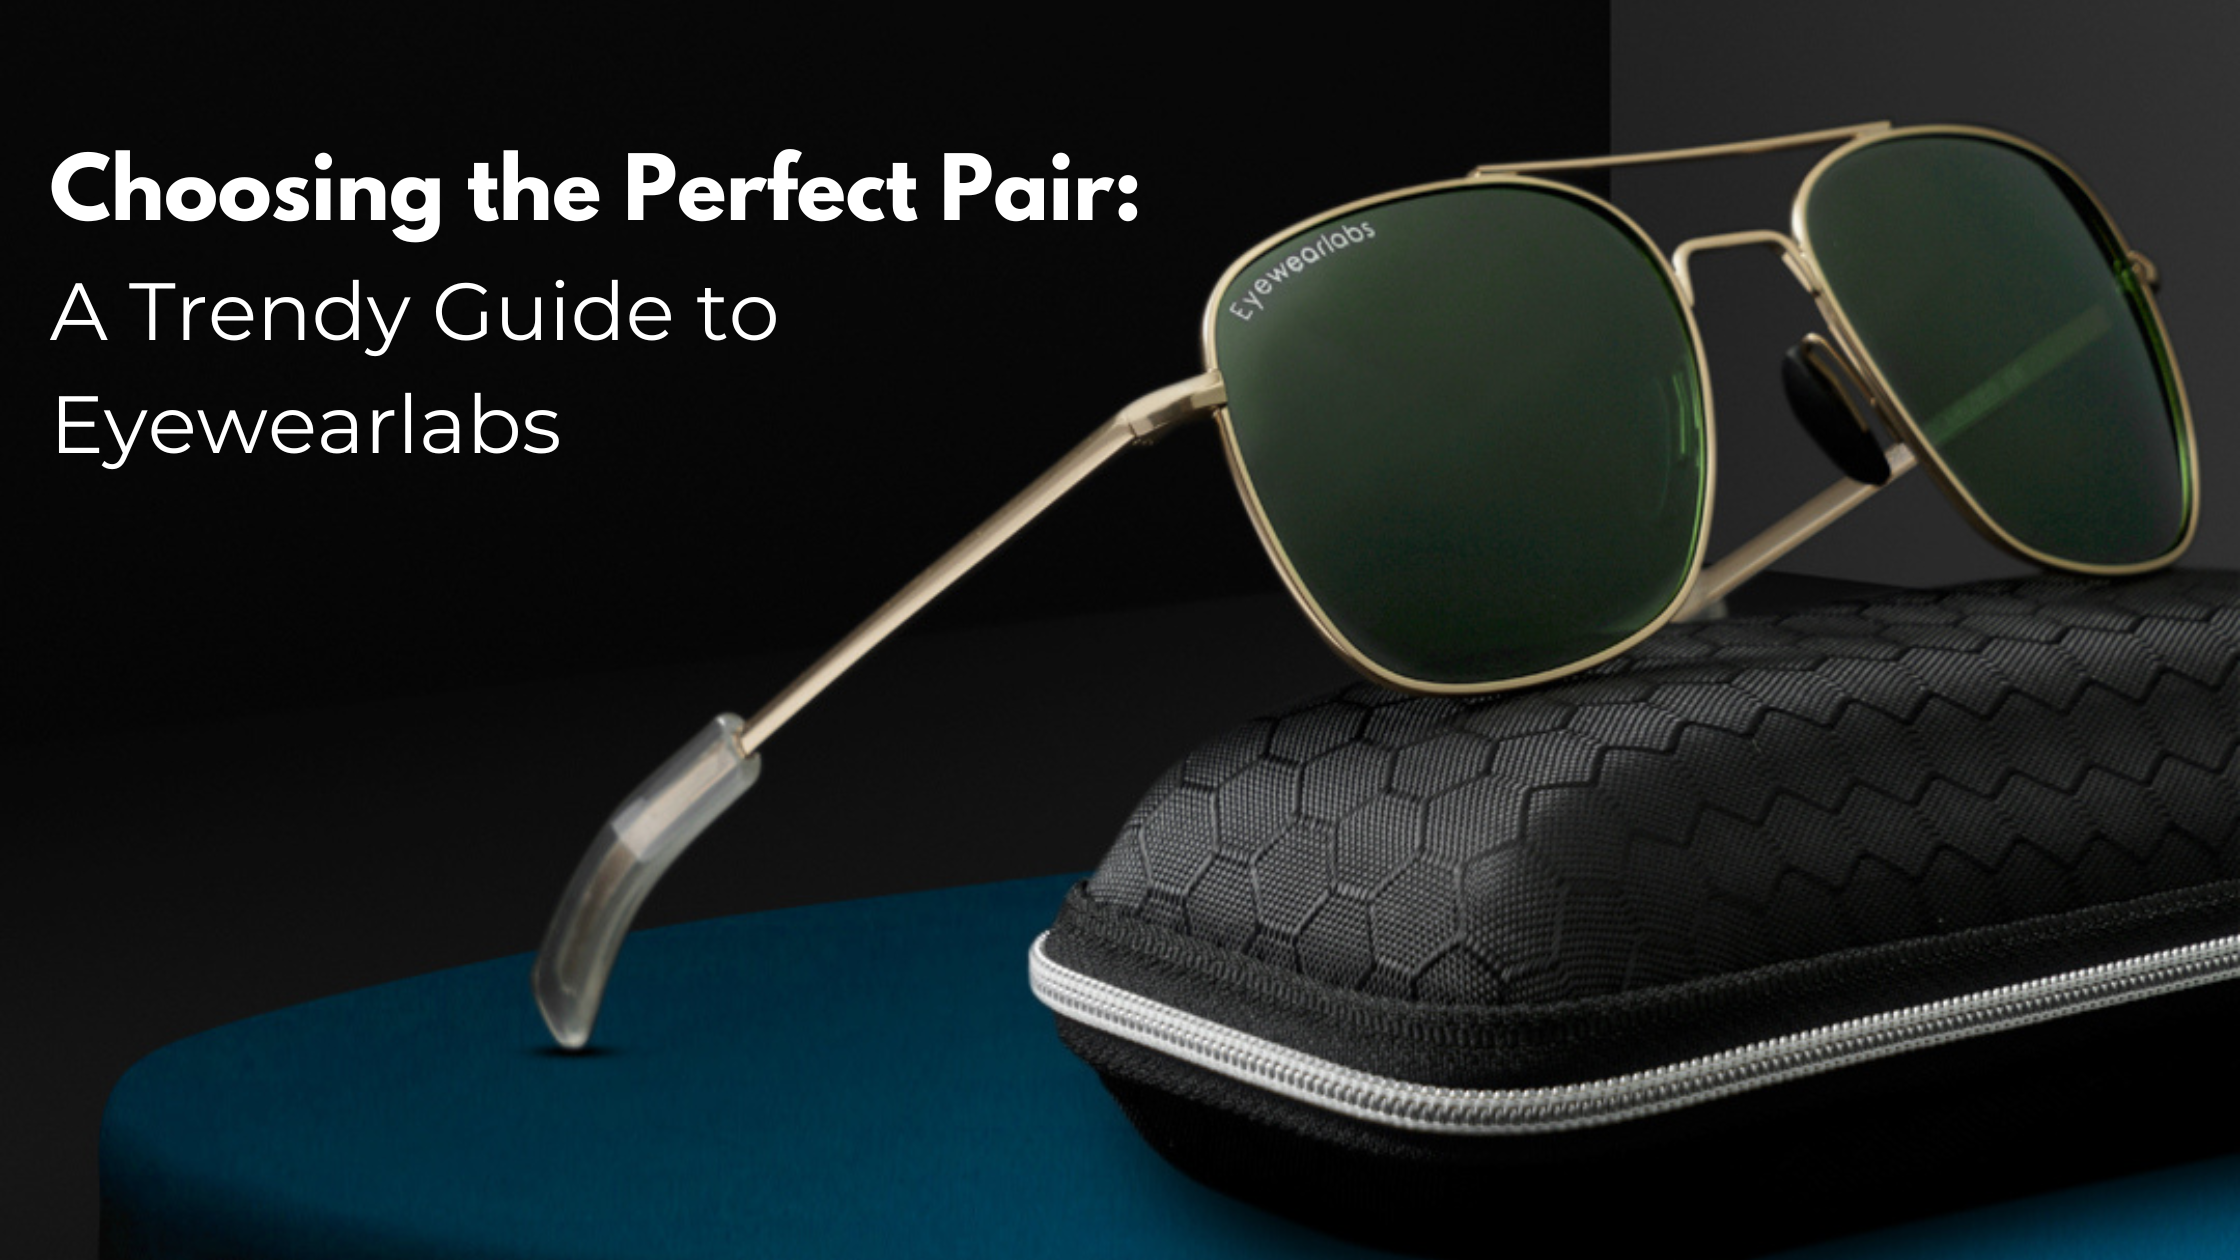 Choosing the Perfect Pair: A Trendy Guide to Eyewearlabs